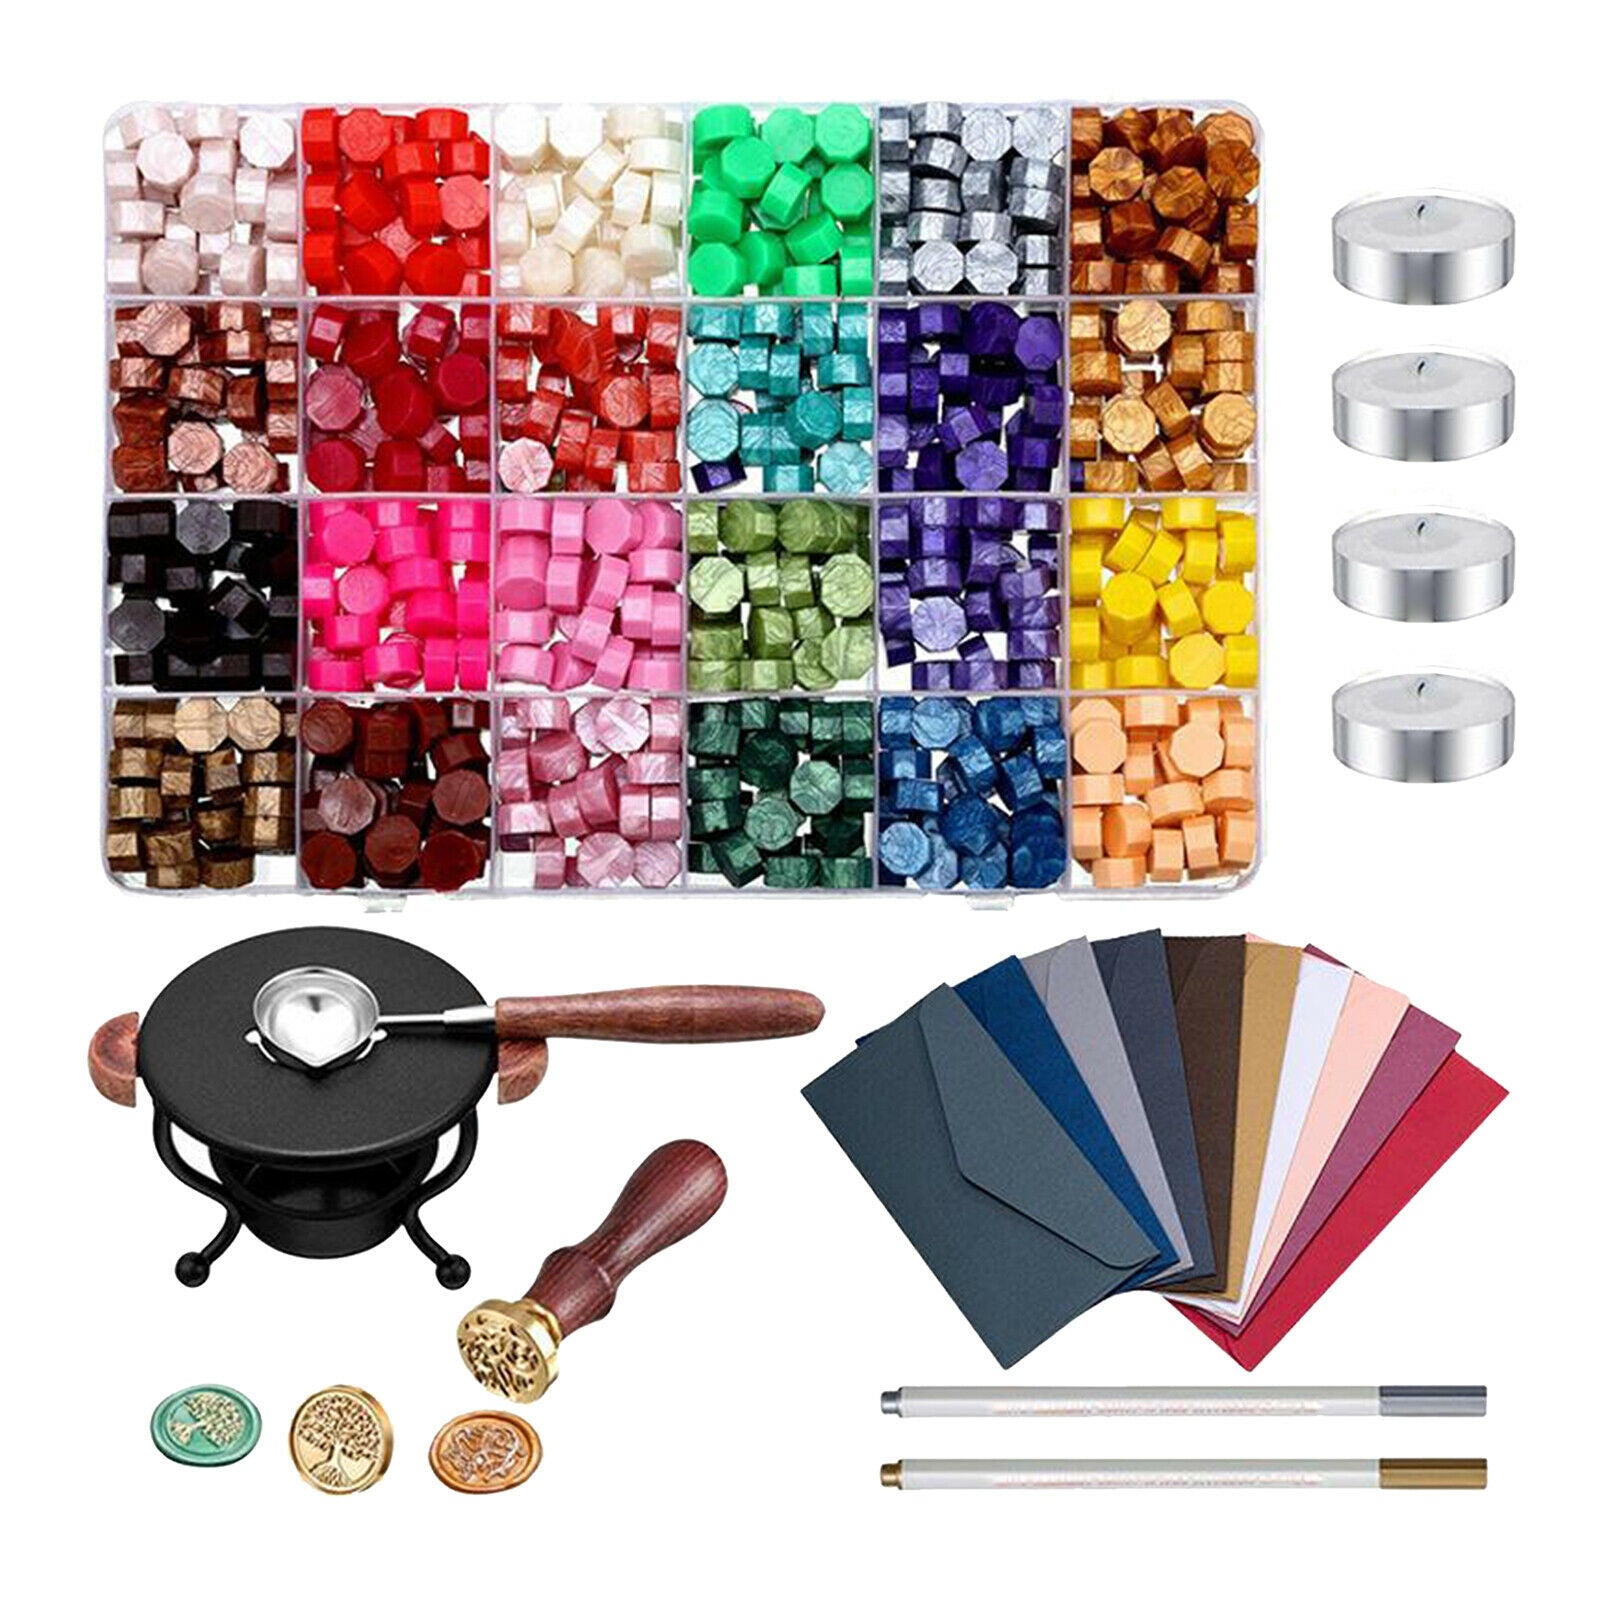 619PCS Wax Sealing Beads Kit for Letter DIY Scrapbooking Projects Seal Set